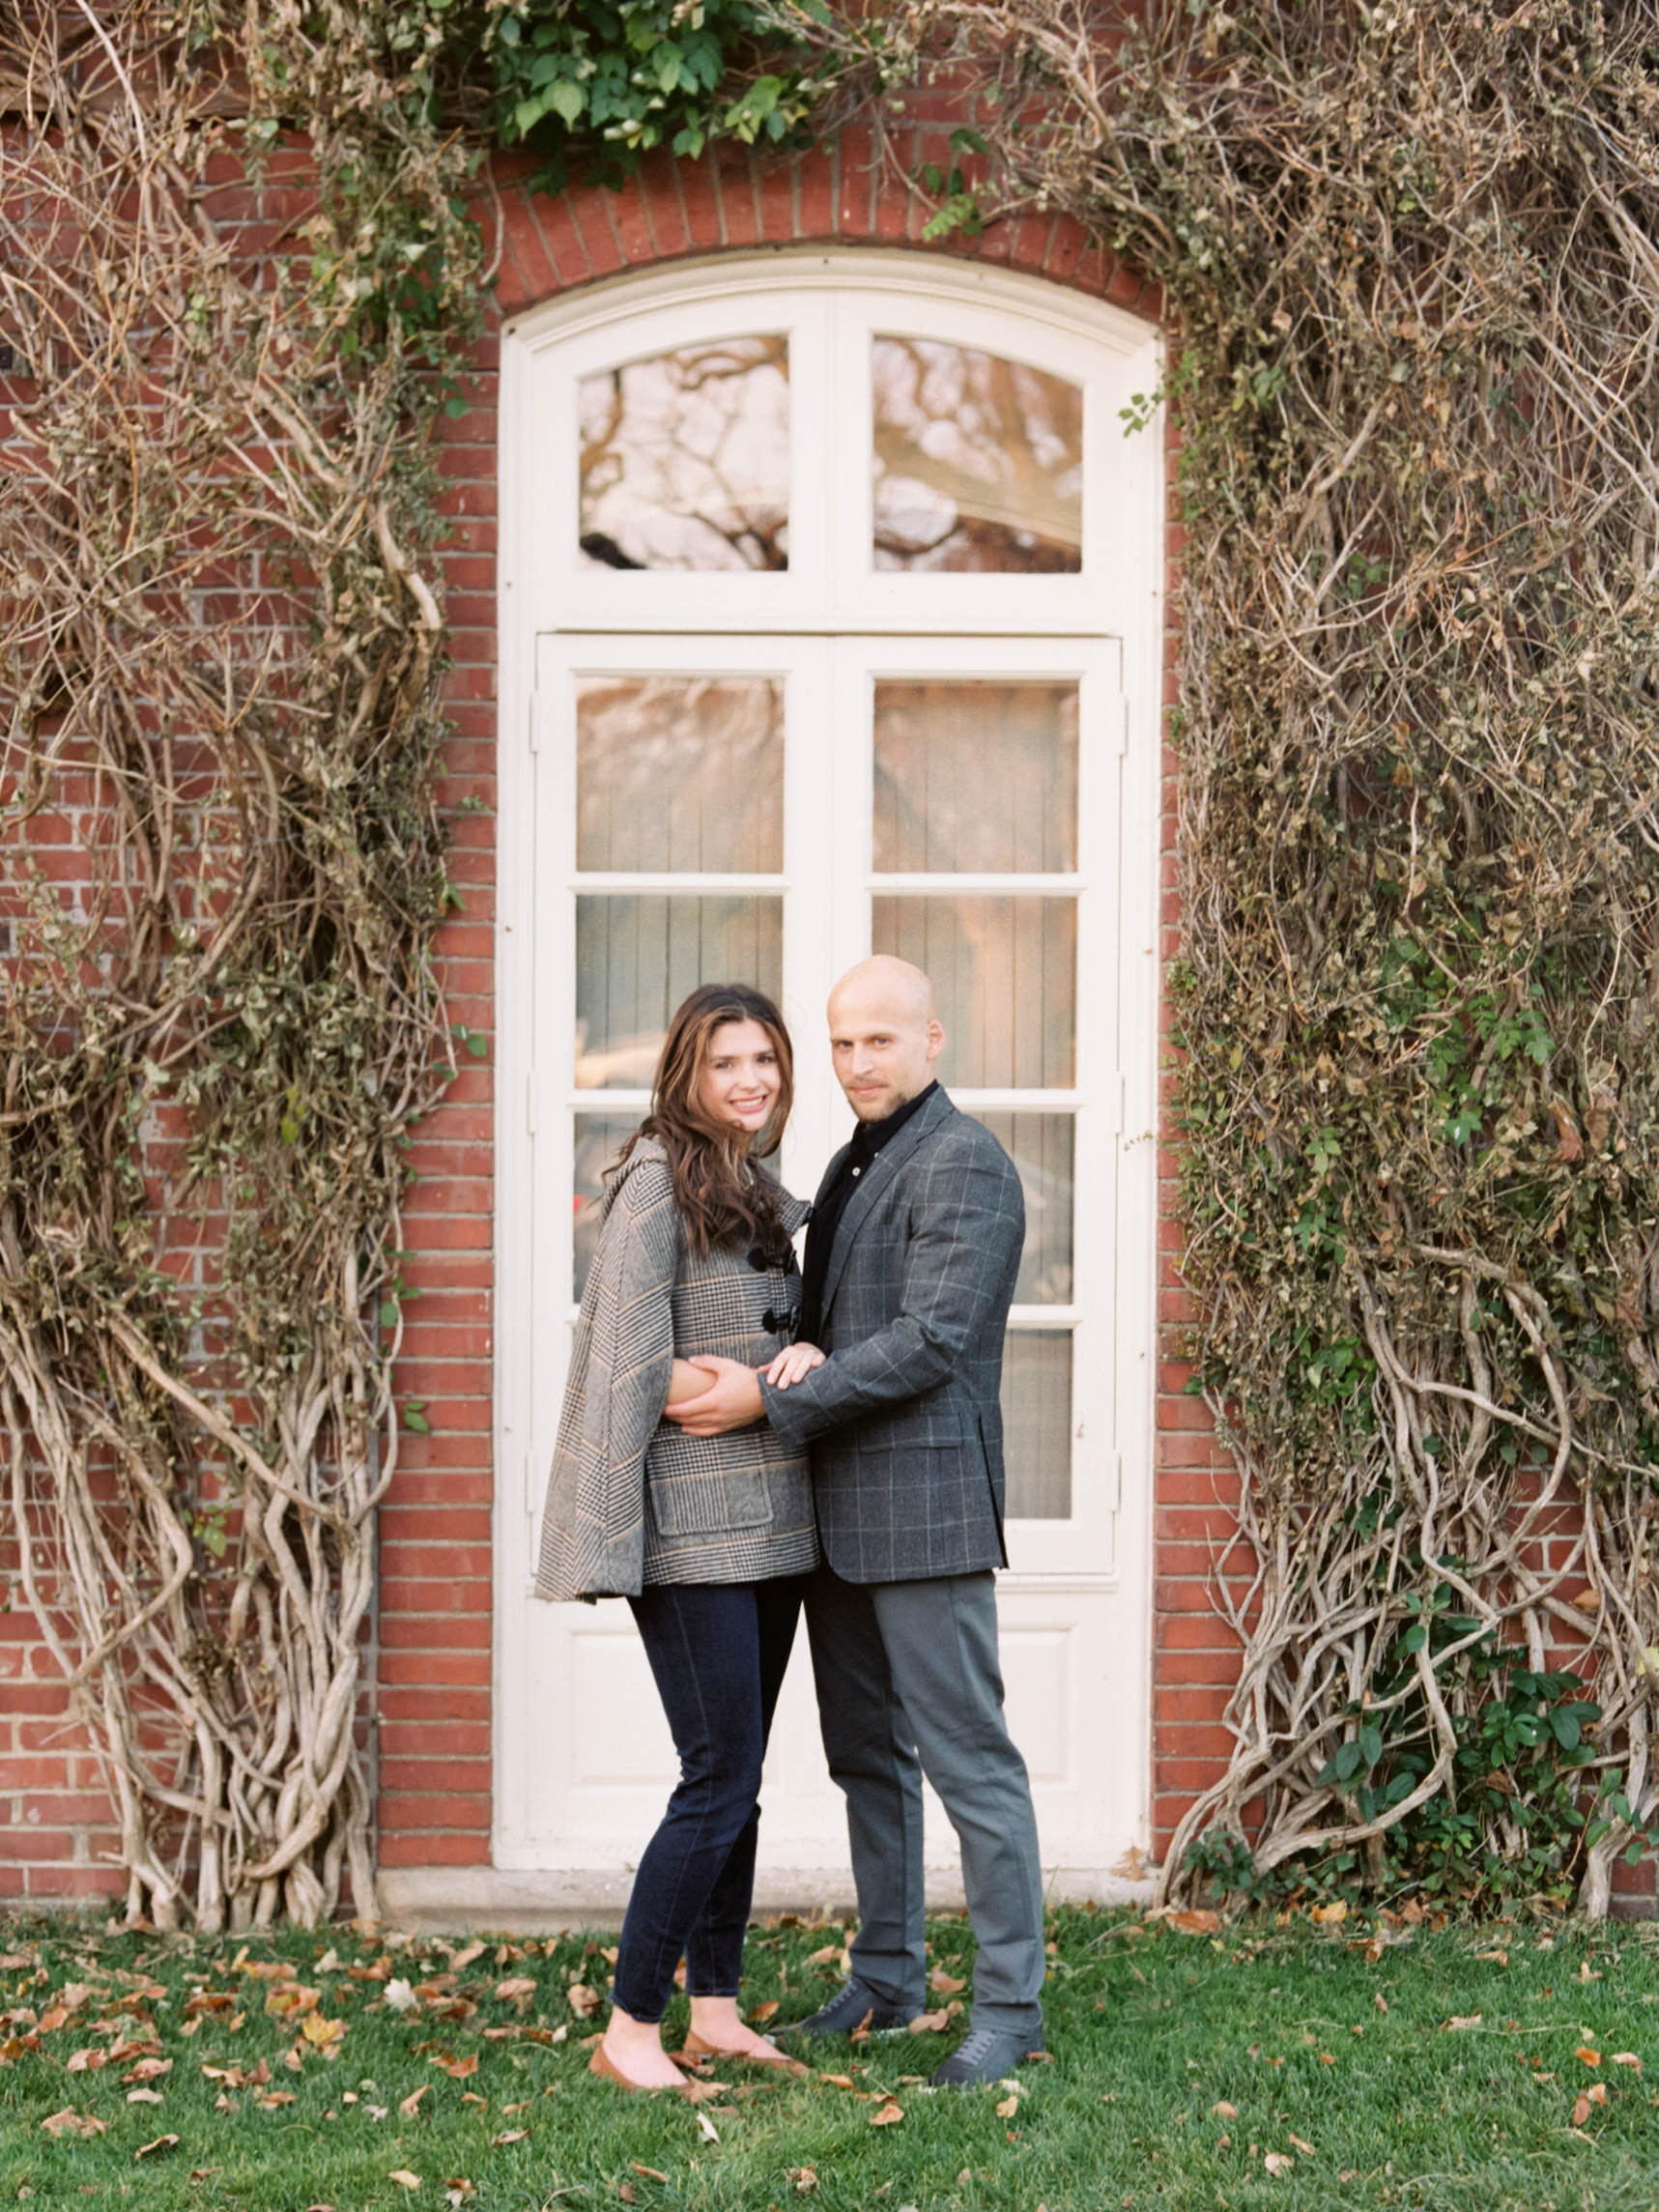 A couple embrace each other in front of a doorway covered in green vines